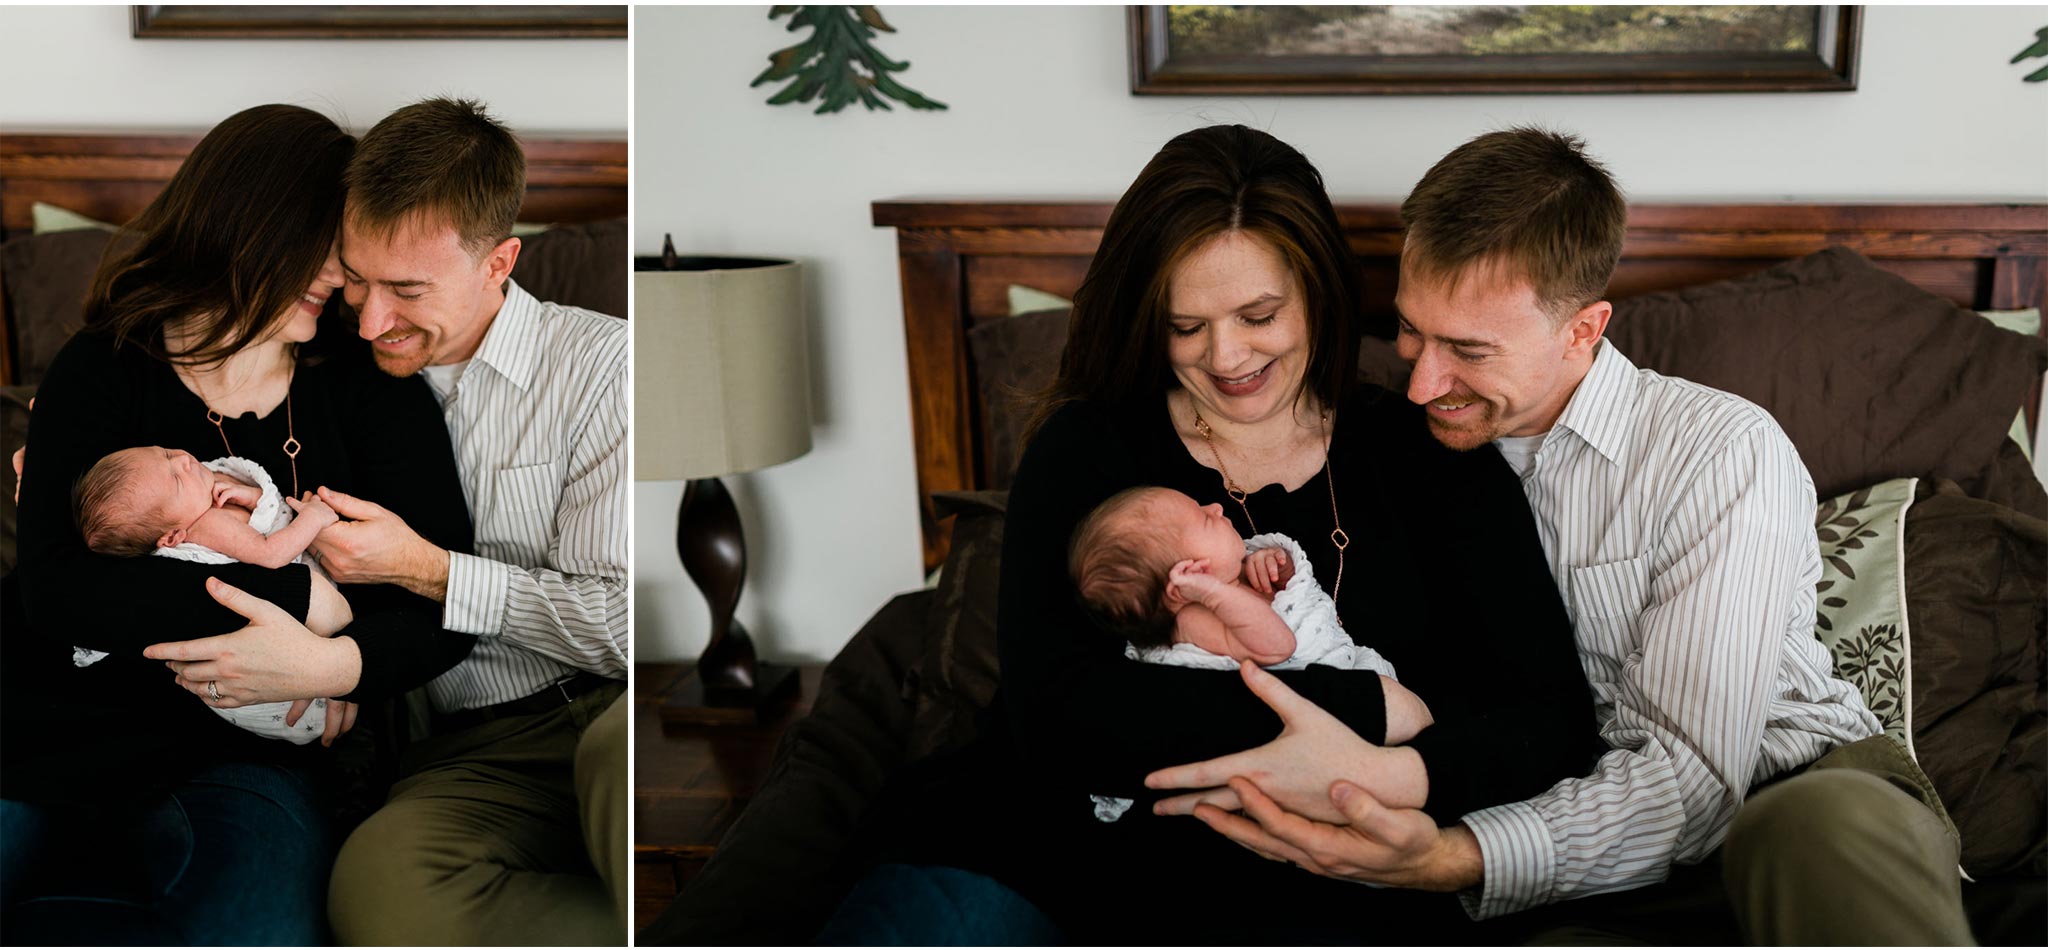 Candid lifestyle newborn session at home | Raleigh Newborn Photographer | By G. Lin Photography